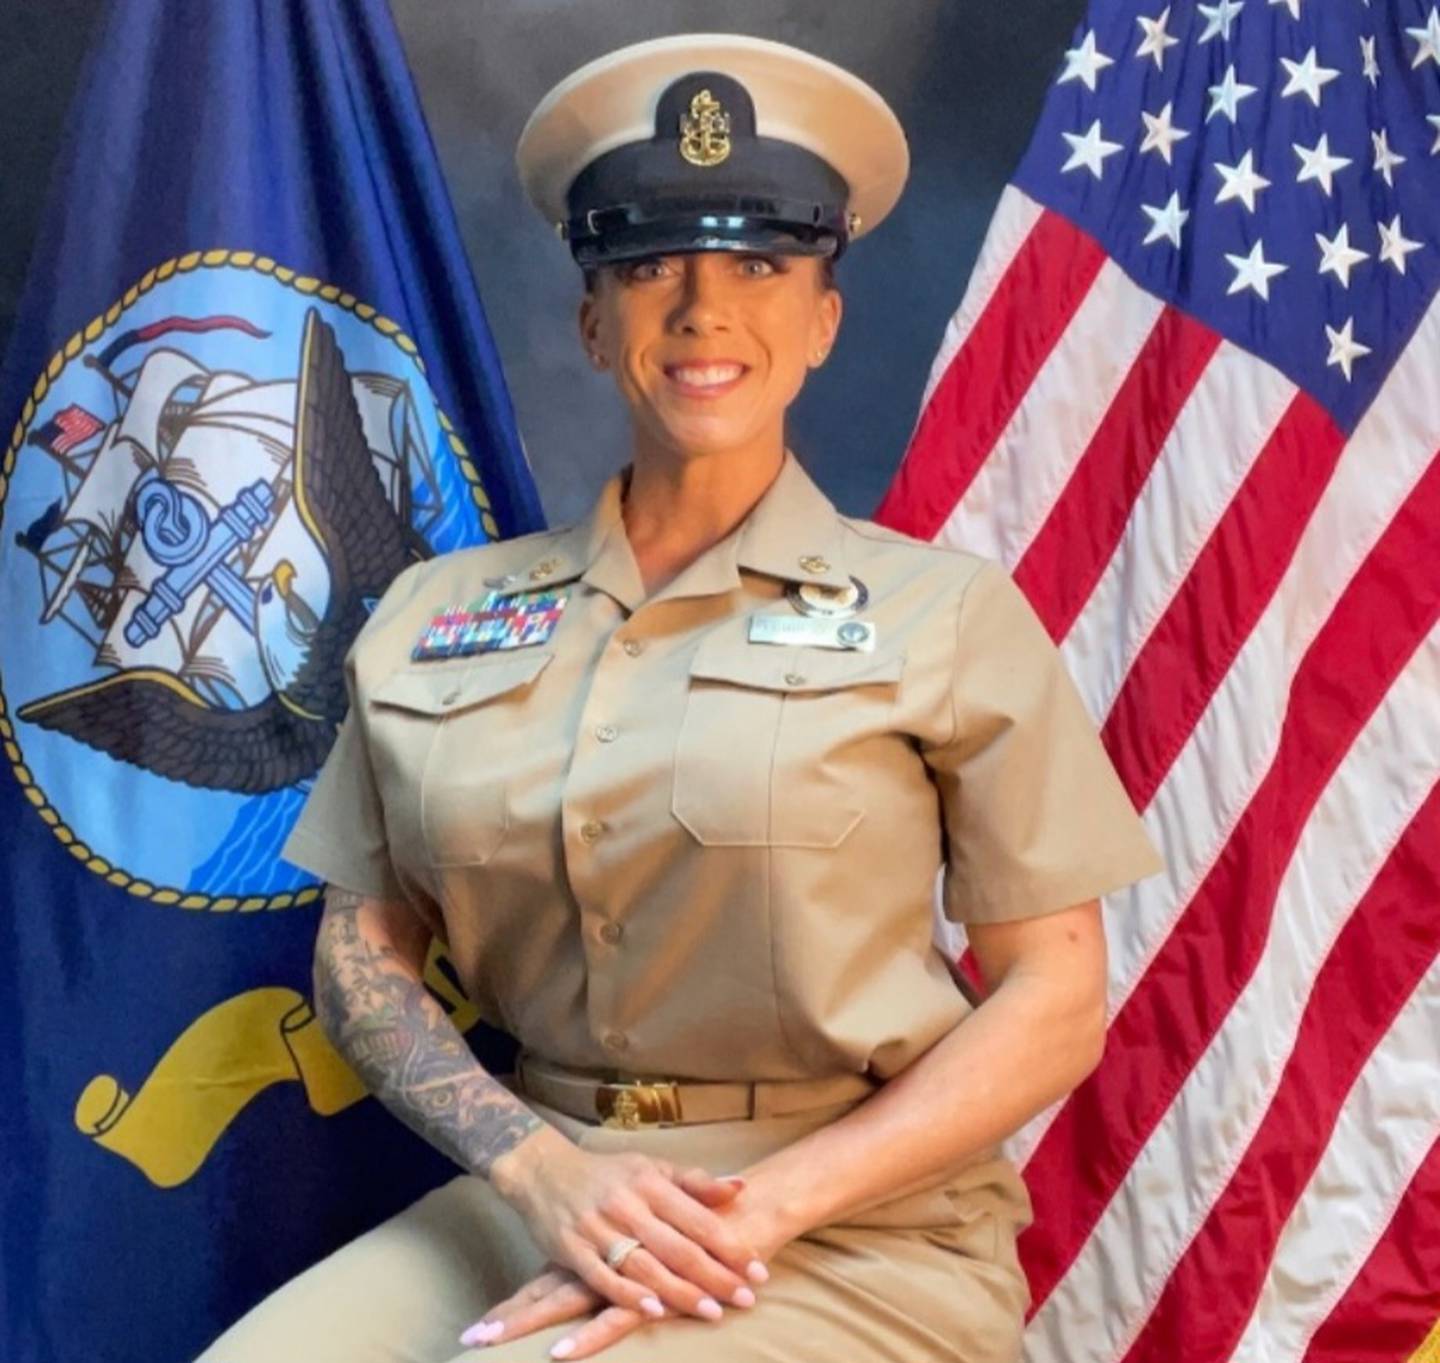 The quest speaker for the program will be Chief Navy Counselor Tanya R. Corbett, US Navy retired.